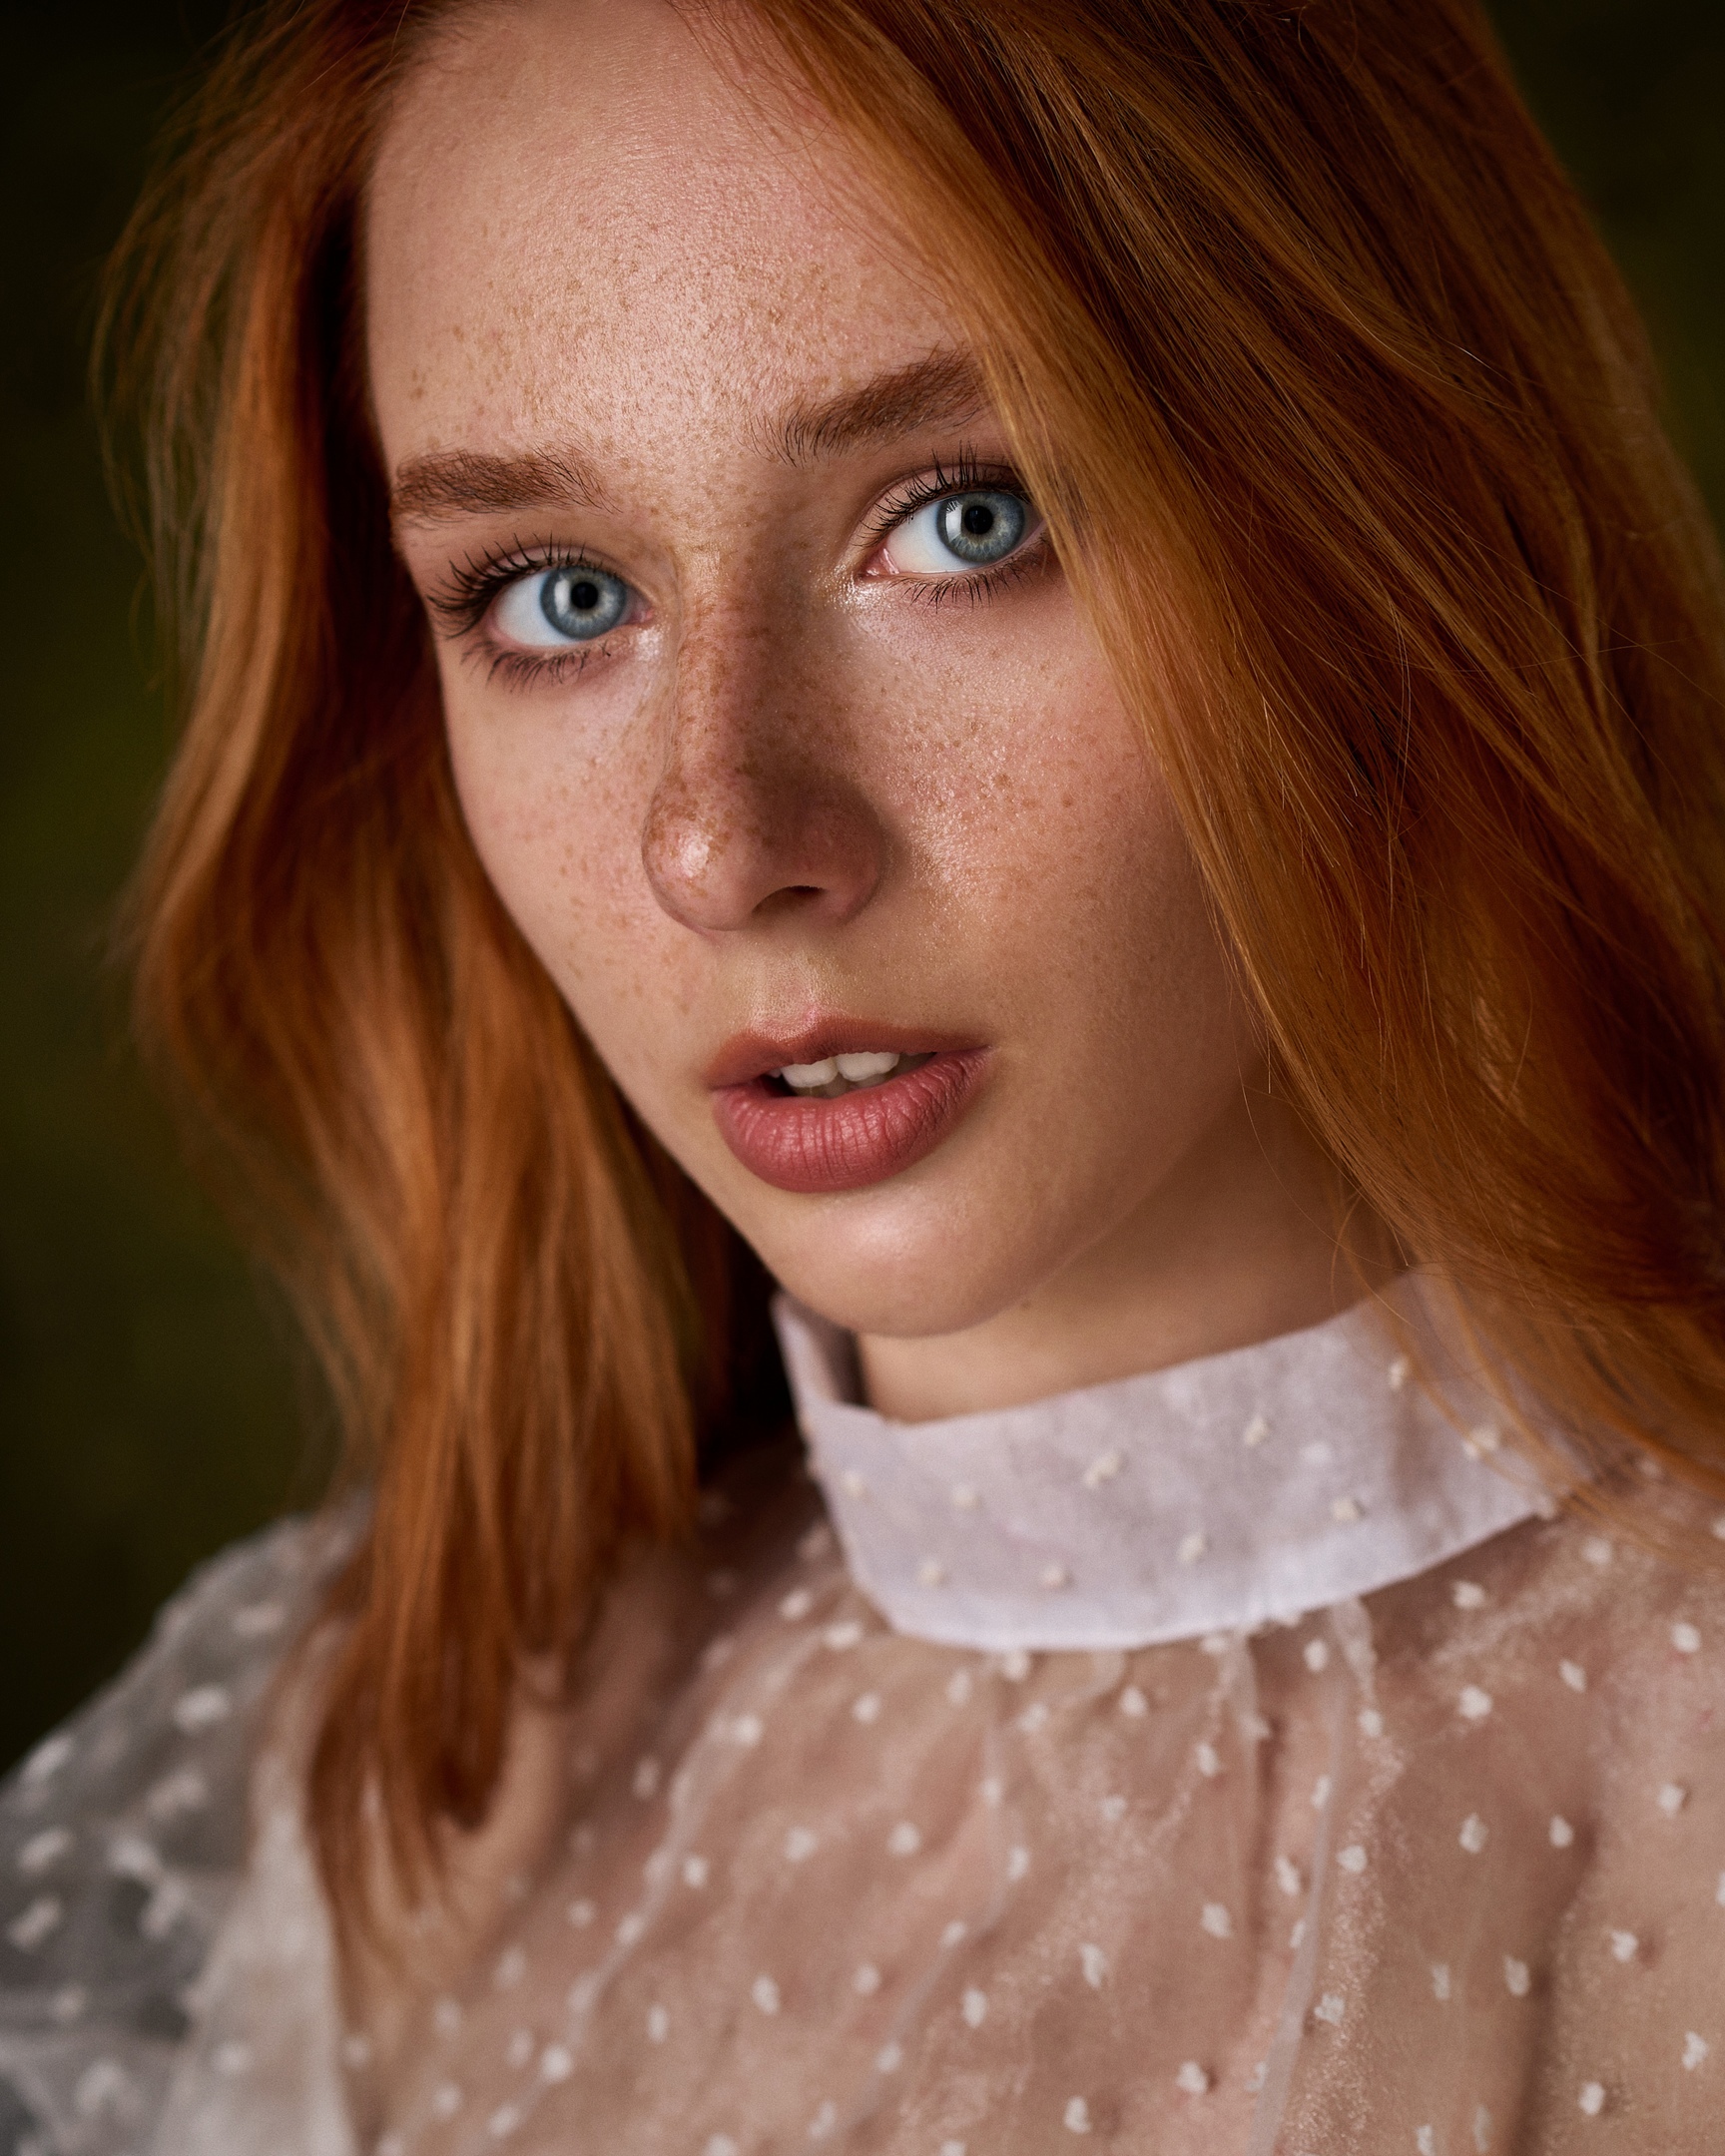 People 1728x2160 Max Pyzhik women Elizaveta Kurilko redhead freckles portrait parted lips sheer clothing looking at viewer model white clothing